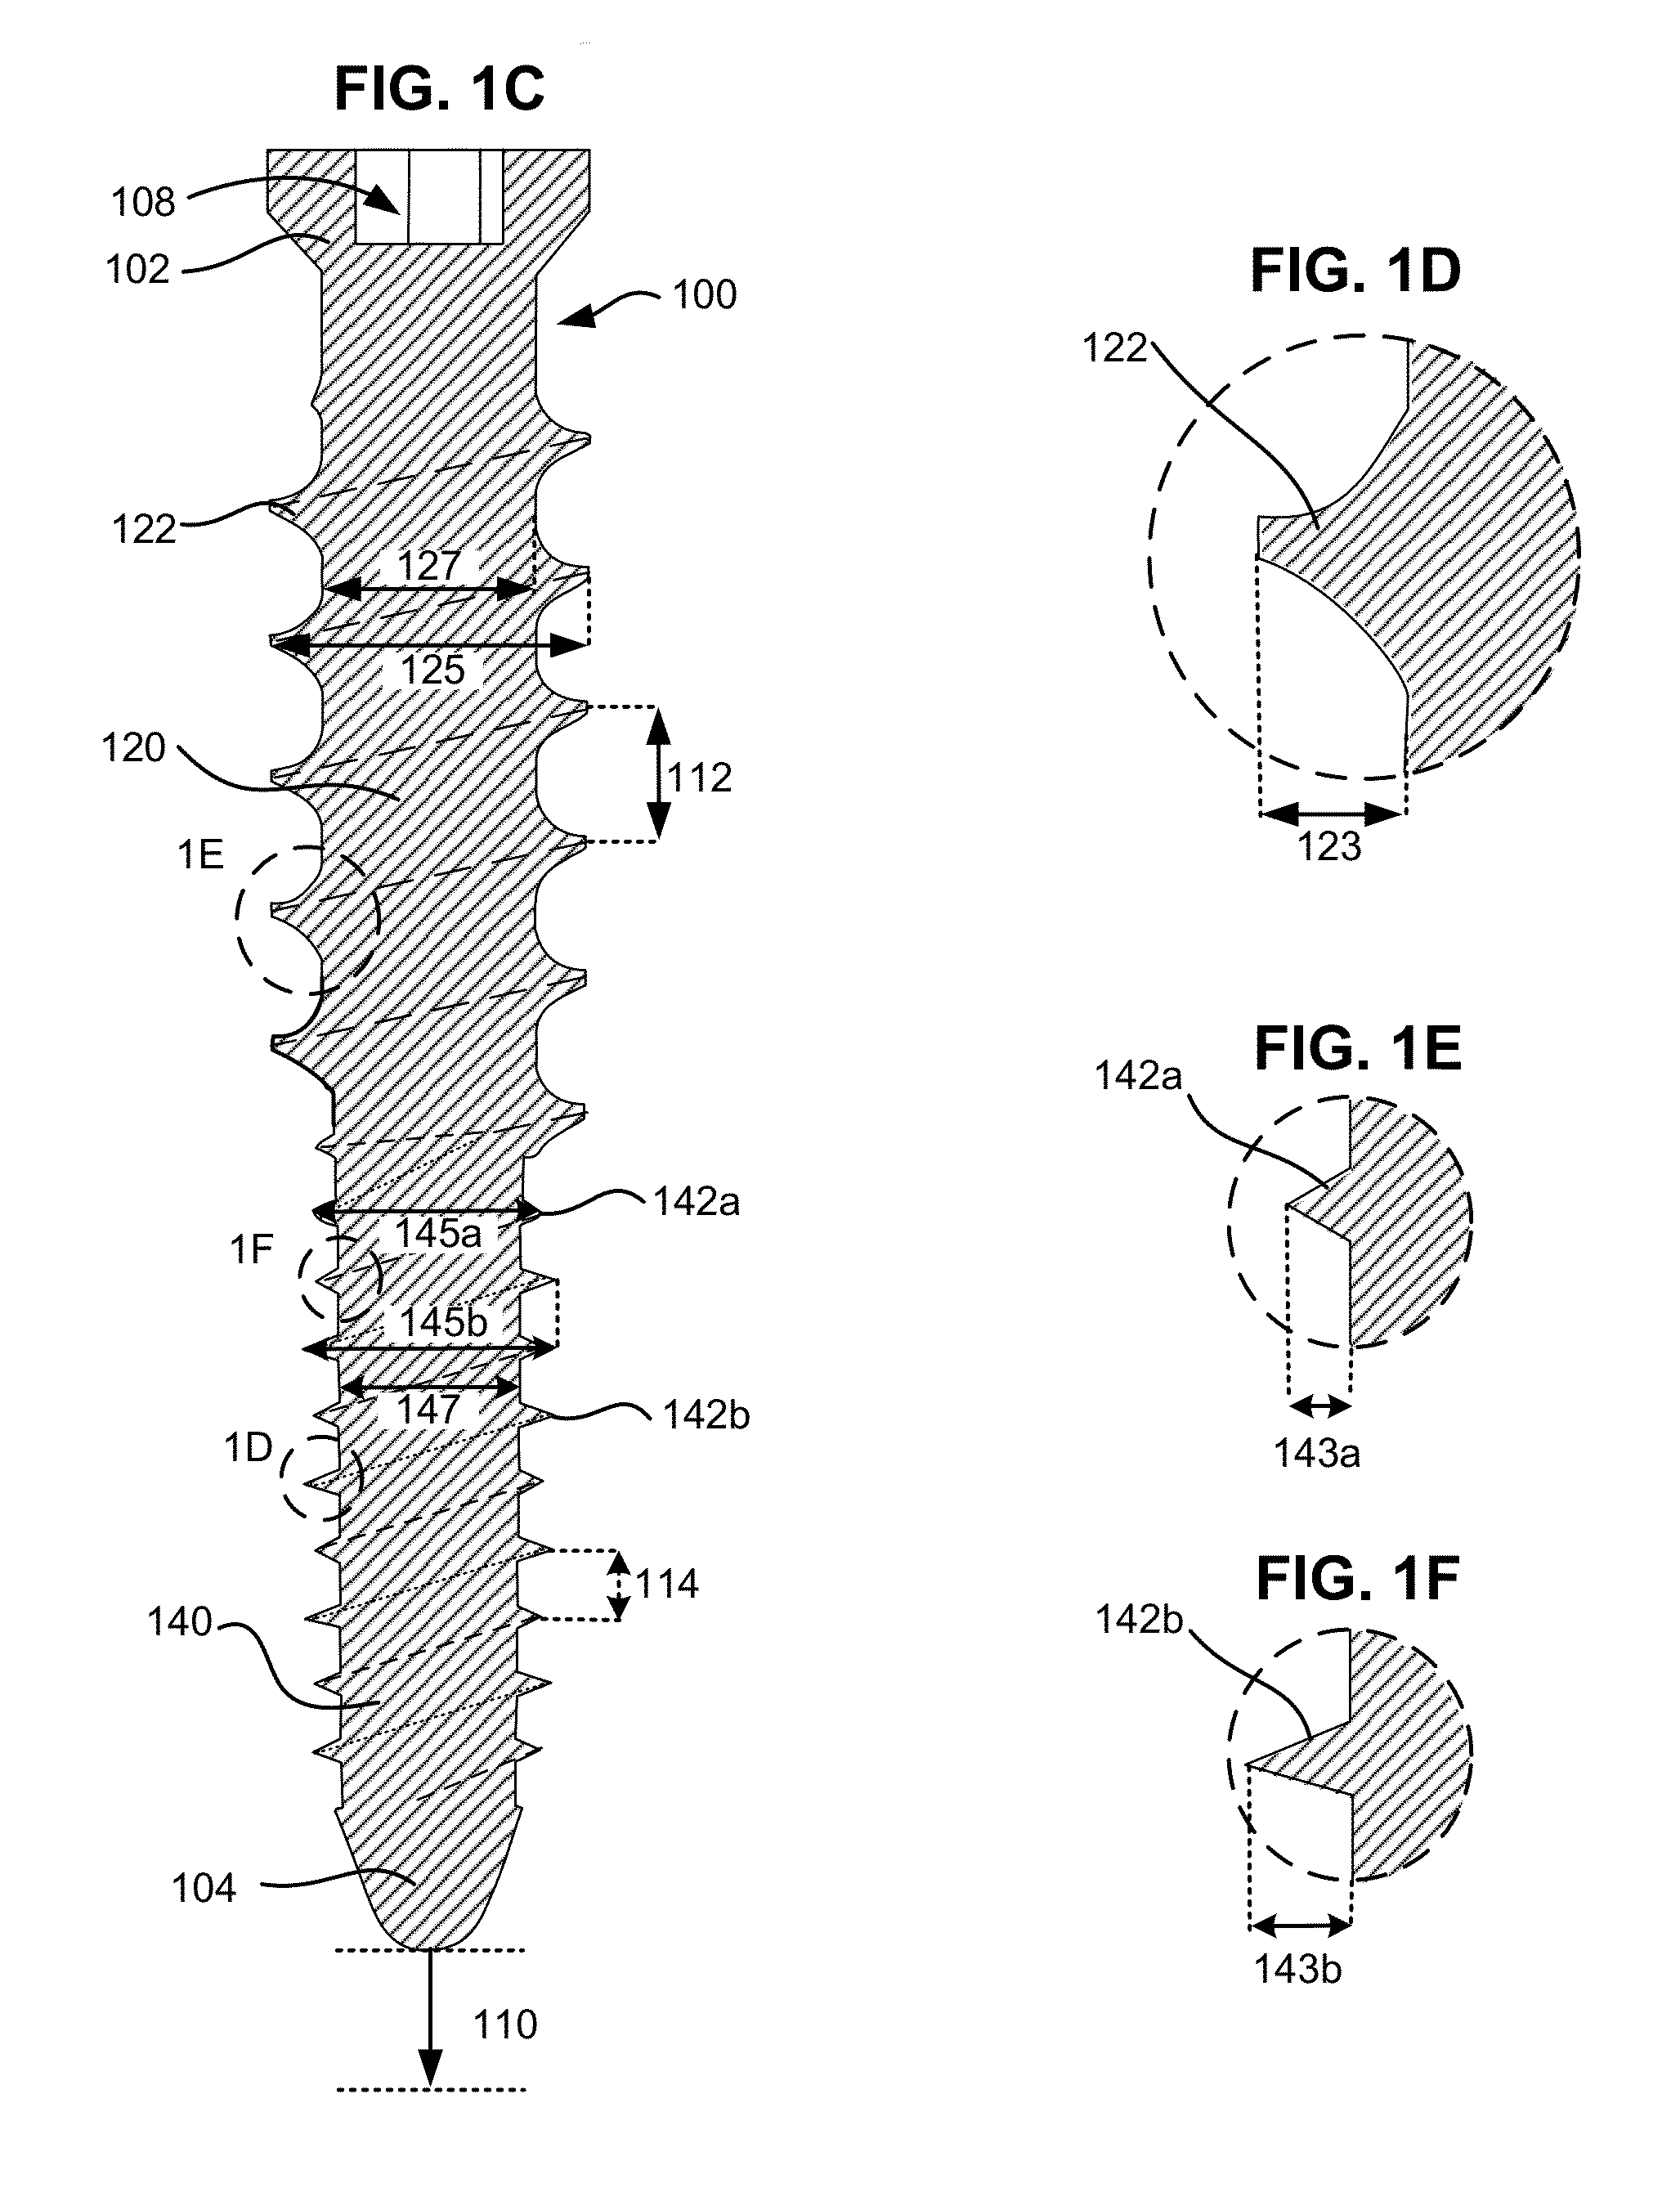 System and method for creating a bore and implanting a bone screw in a vertebra